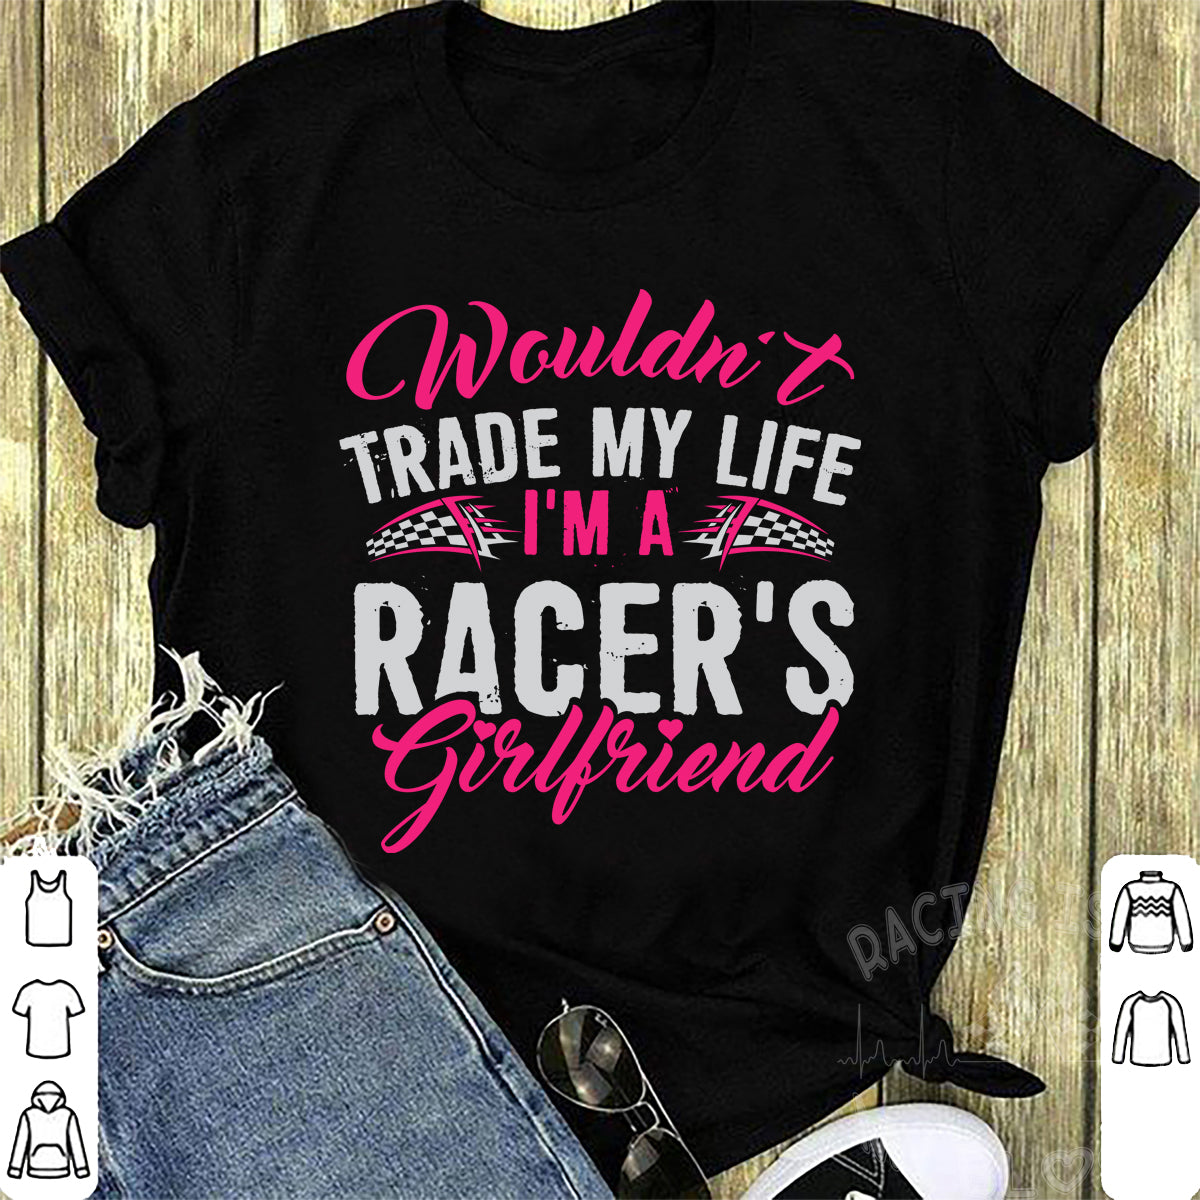 Wouldn't Trade My Life I'm A Racer's Girlfriend T-Shirts!